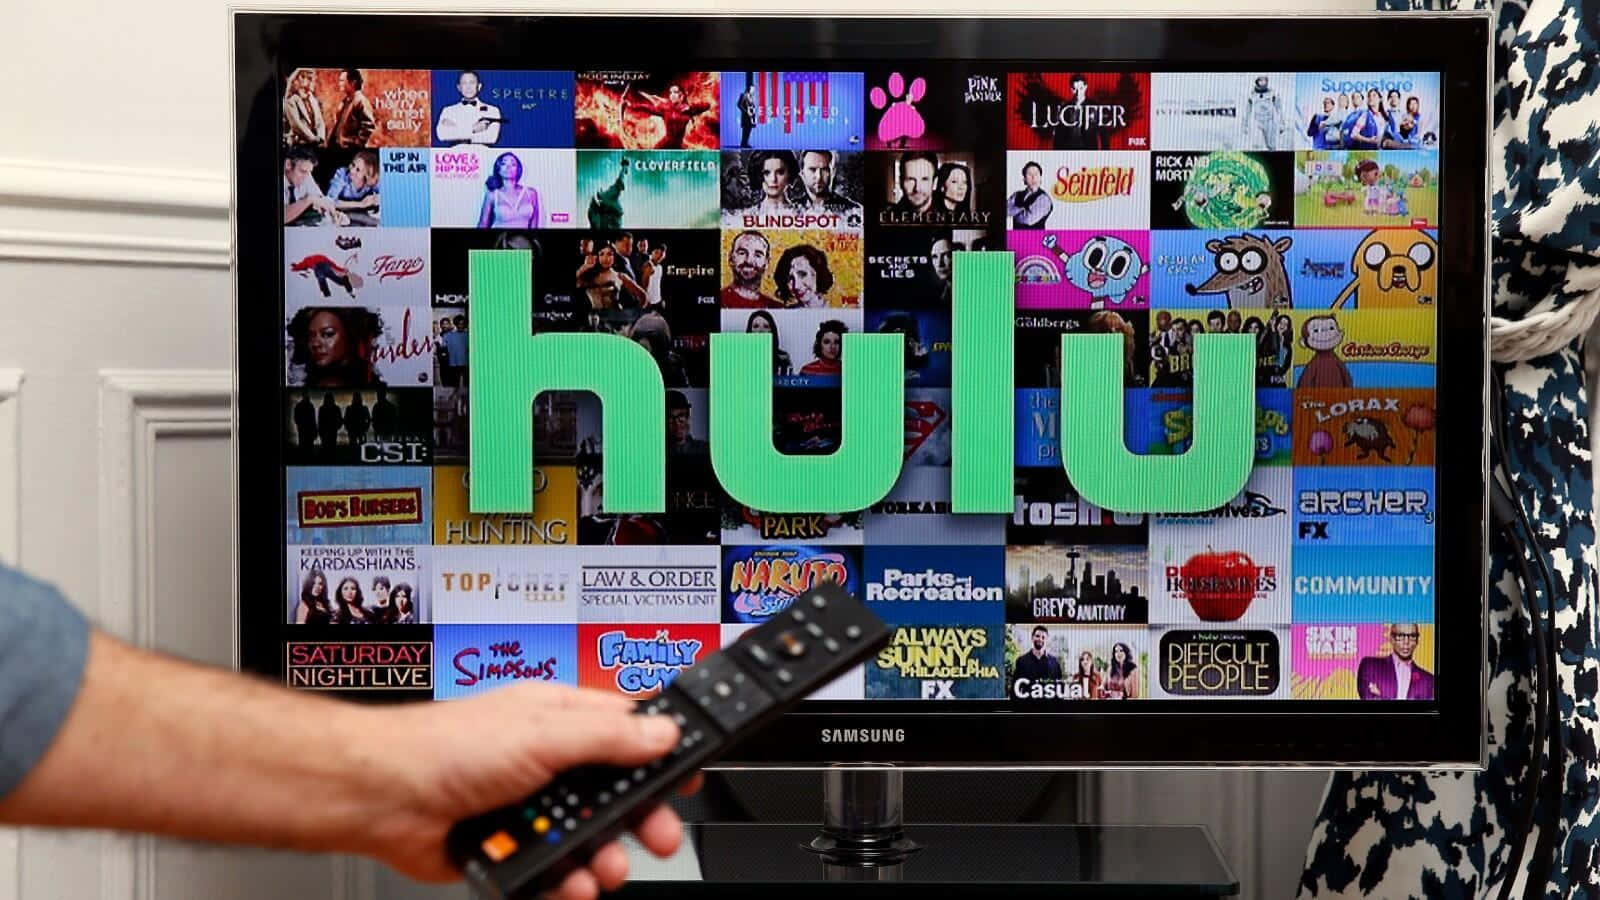 Find entertainment for you with Hulu